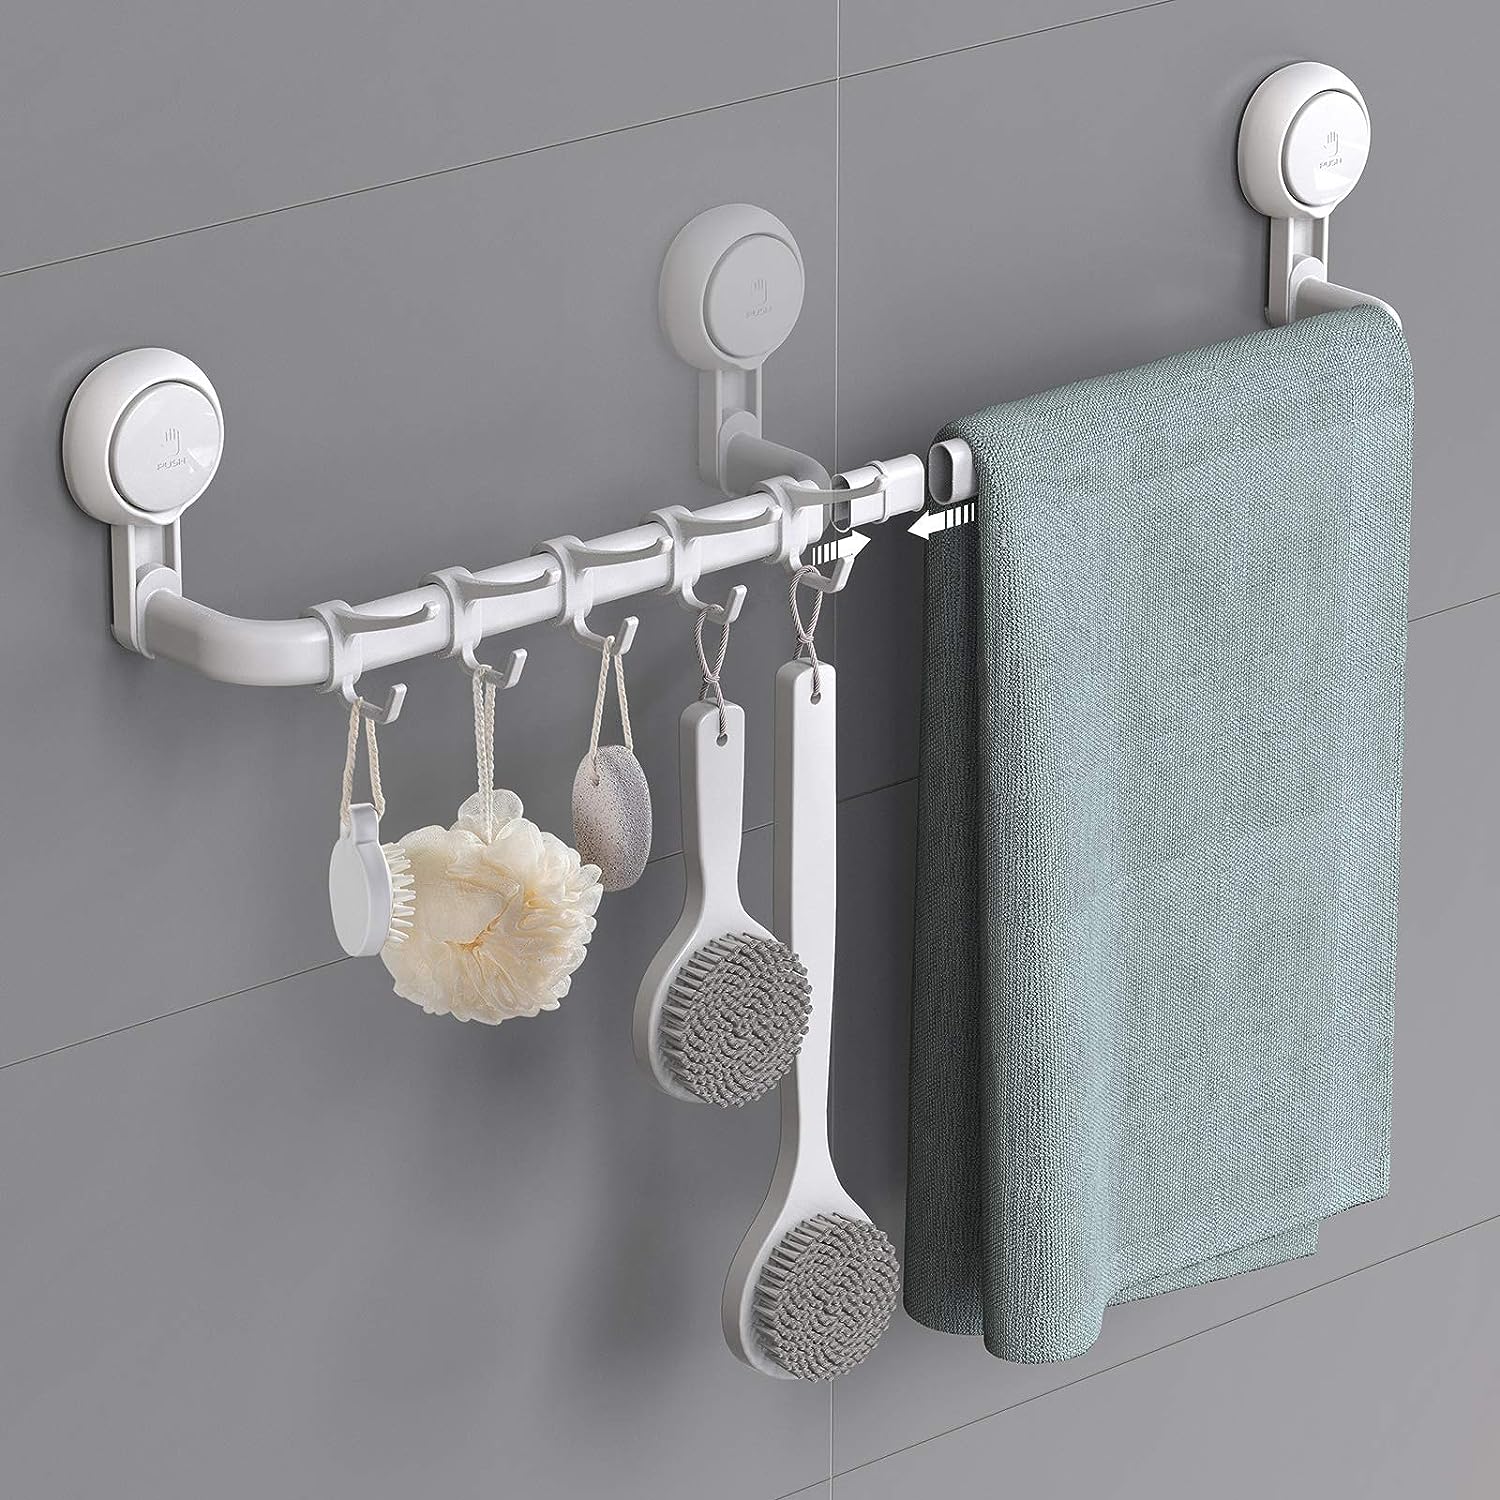 10 Best Suction Cup Towel Bar for 2023